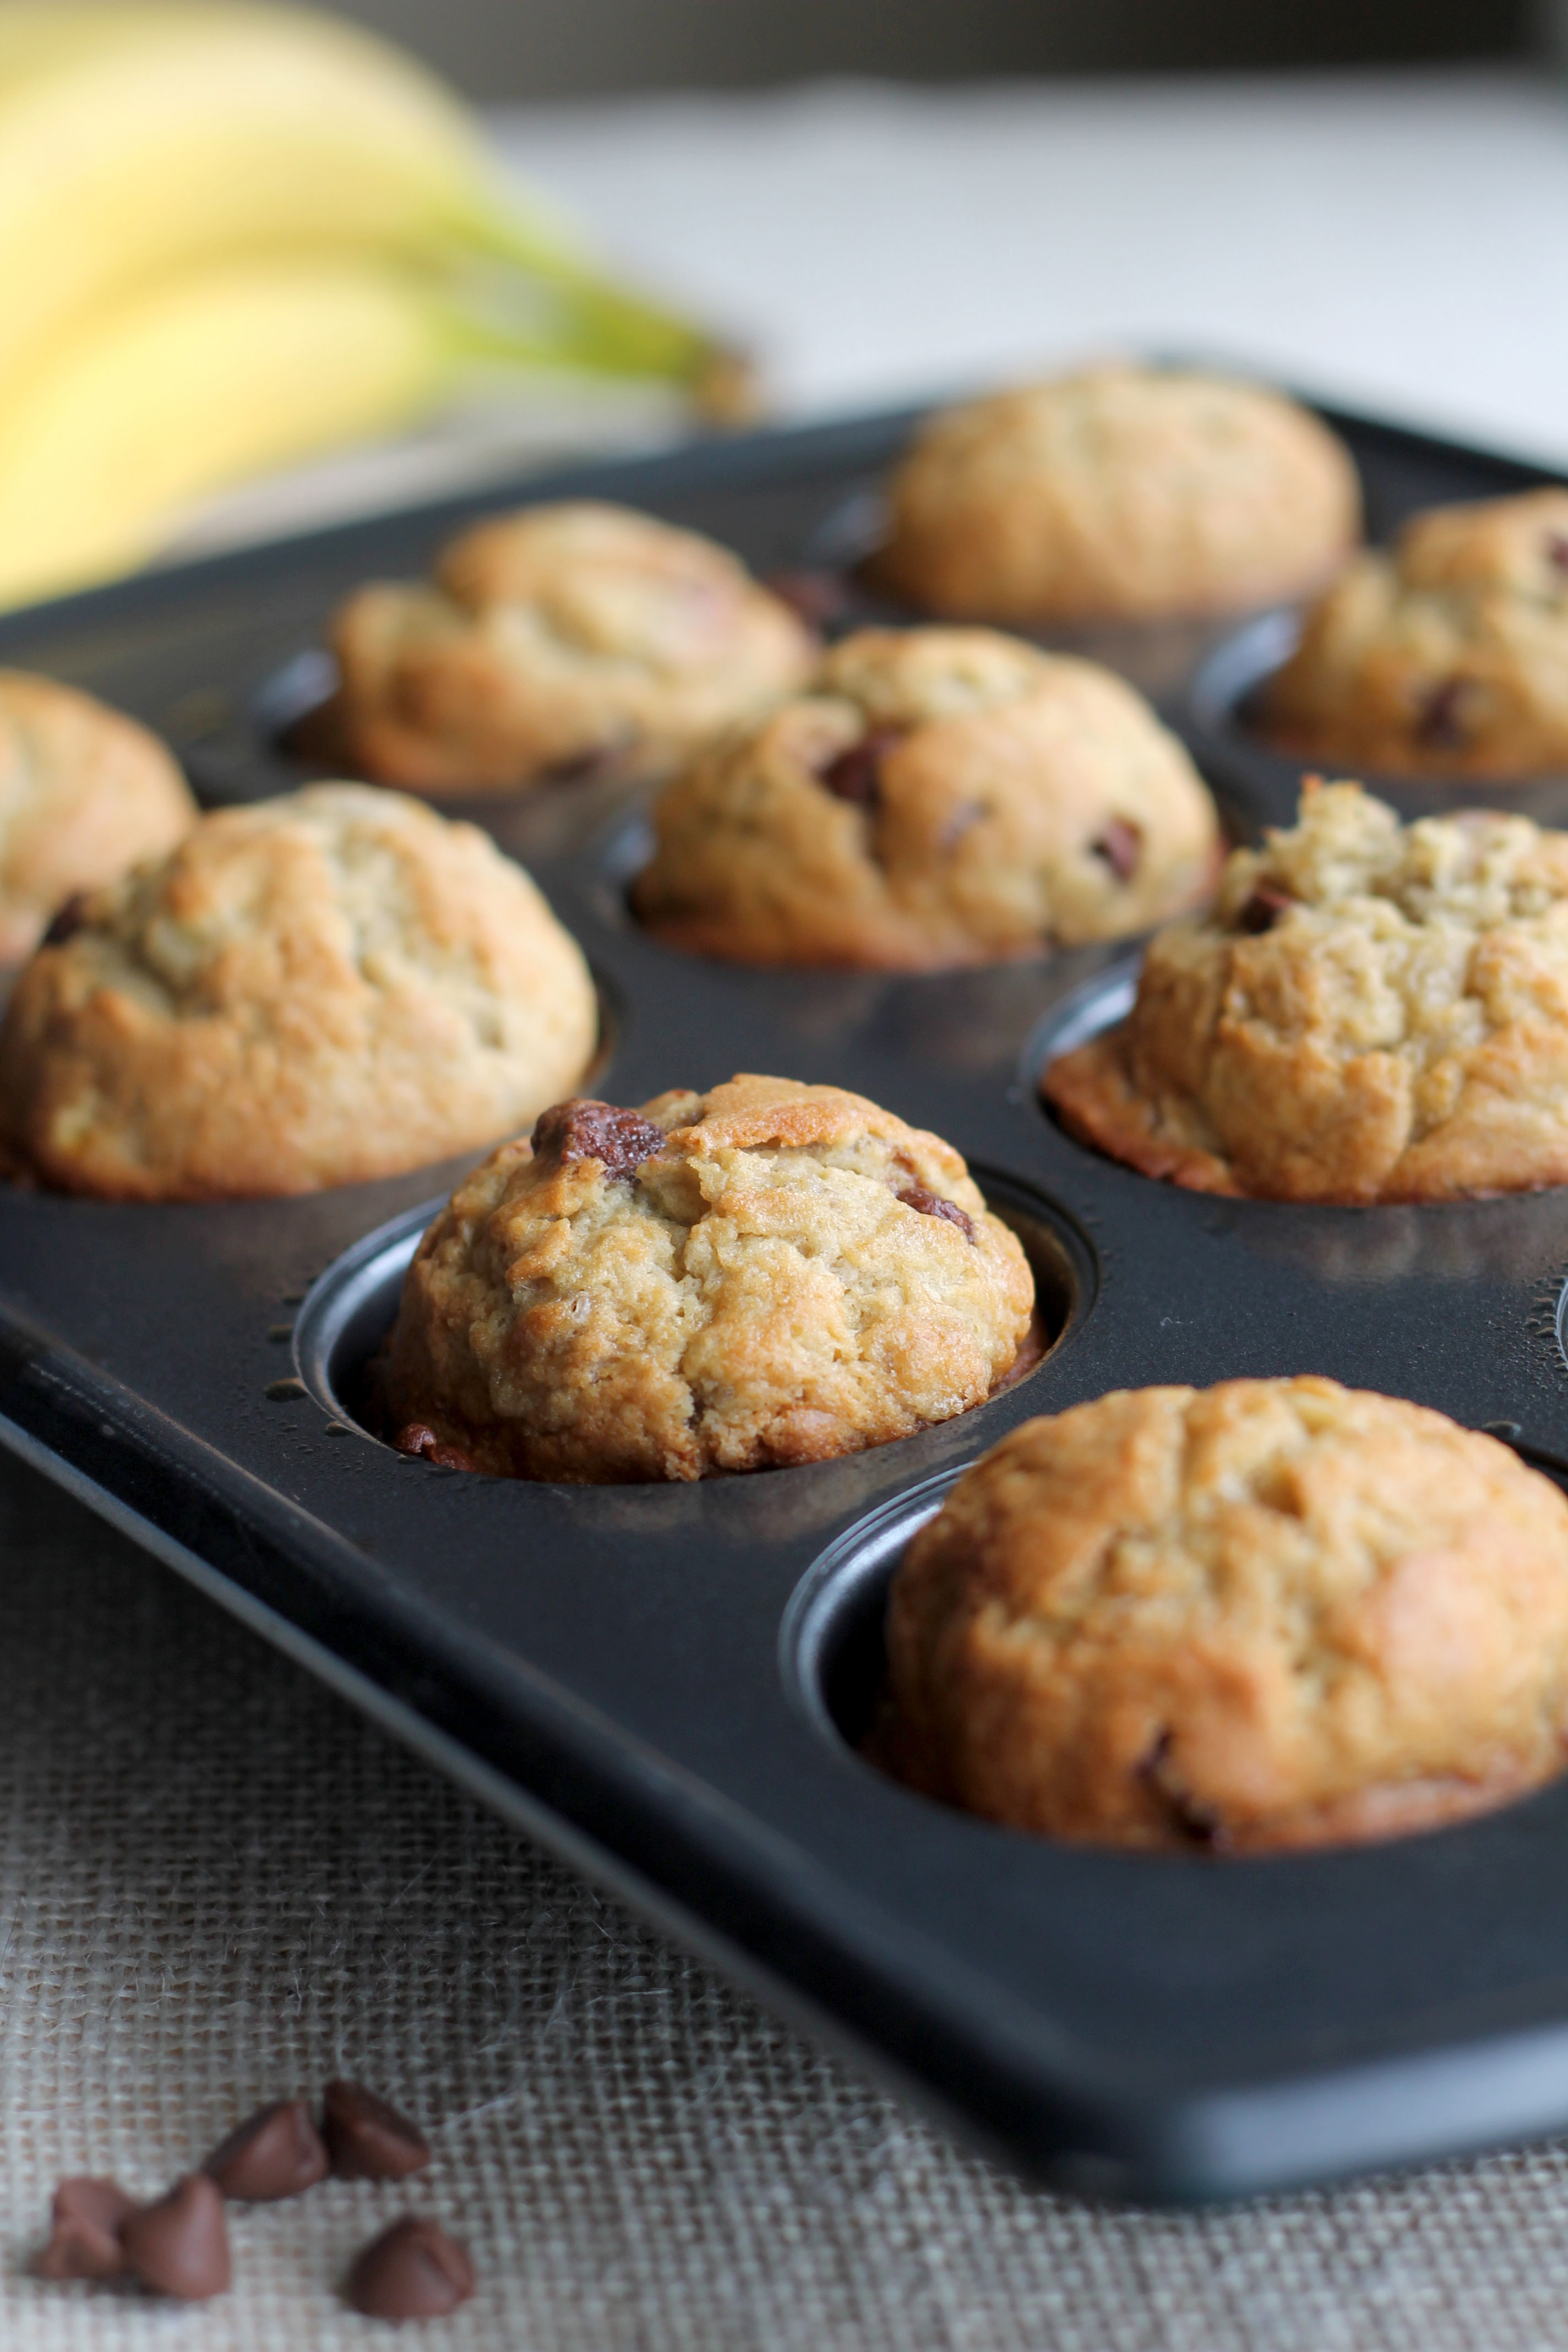 Tired of just making banana bread with those ripe bananas? Make these Banana Chocolate Chip Muffins instead!